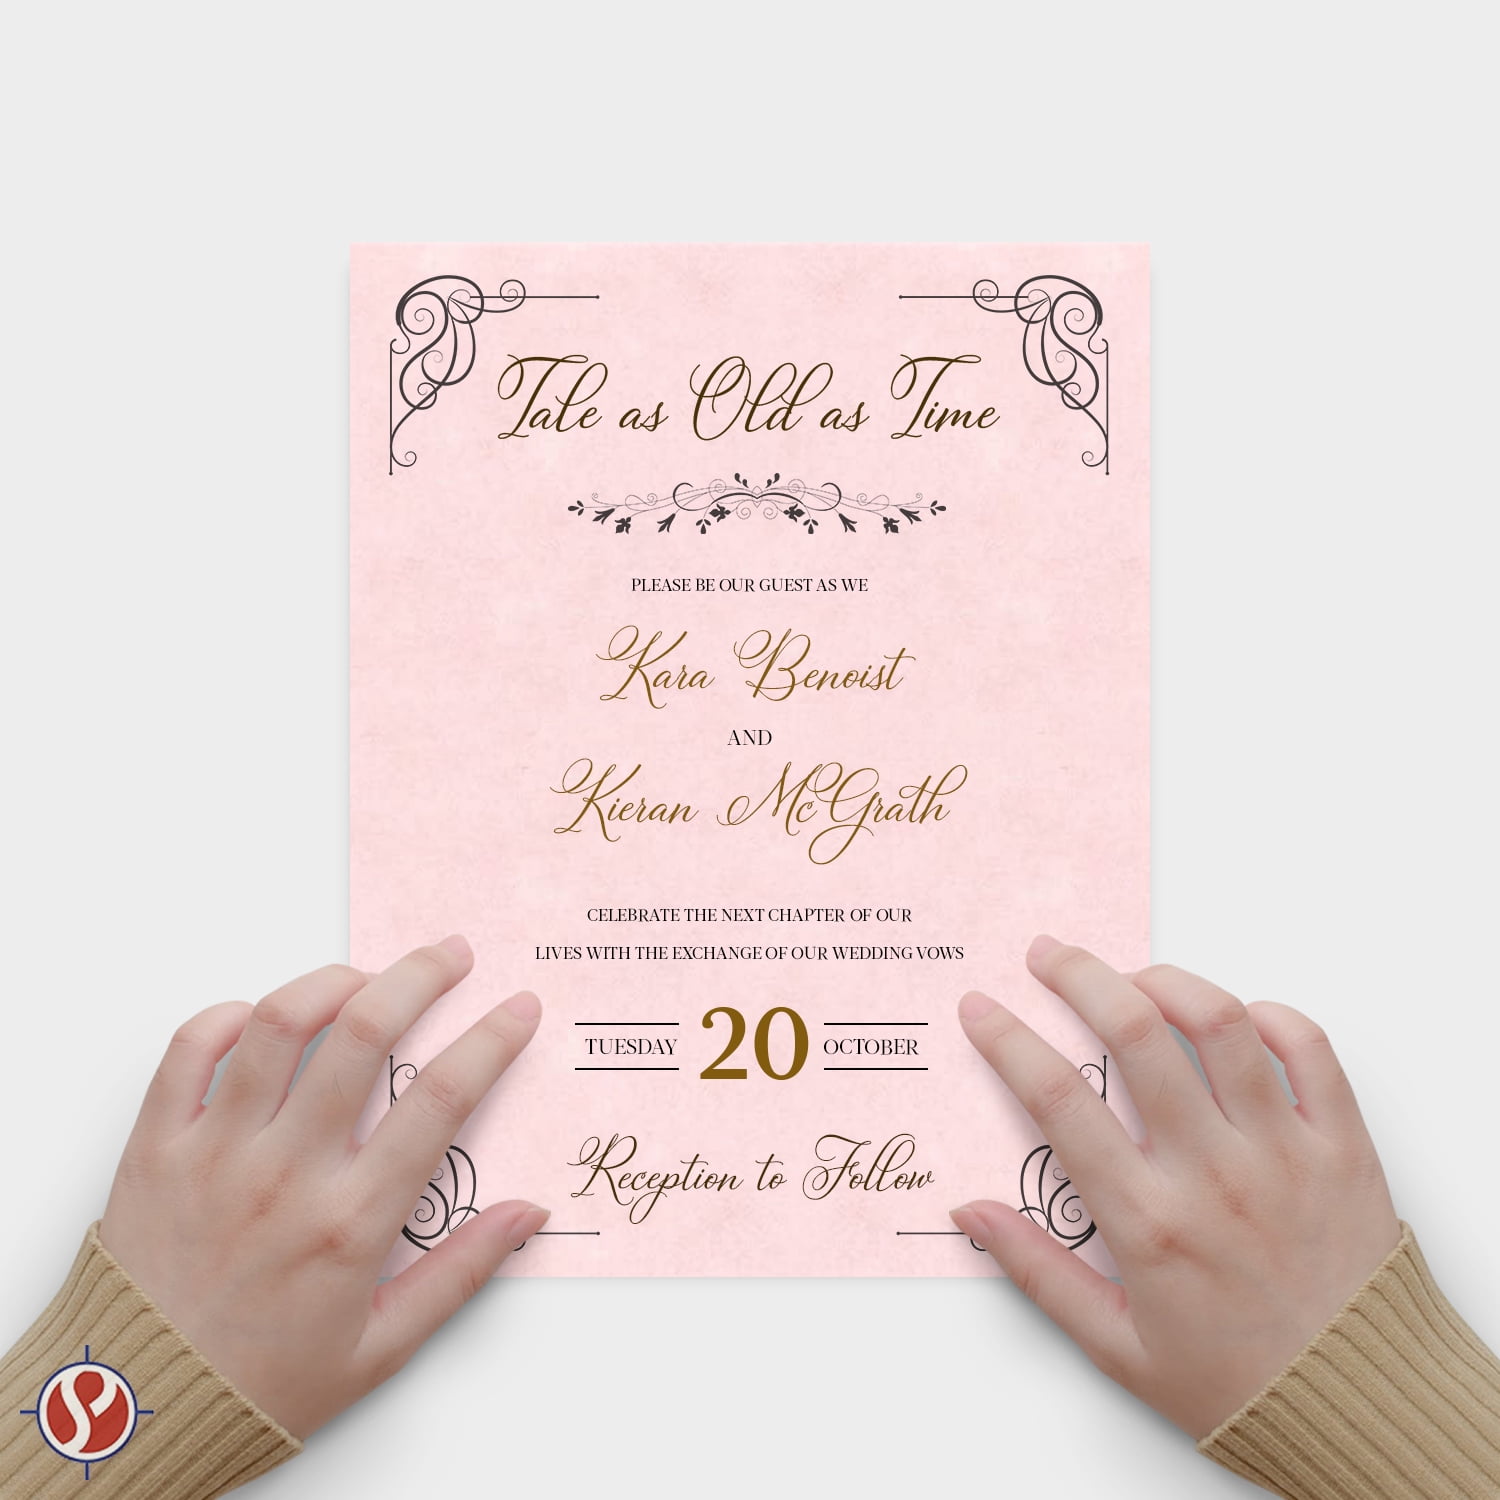 Pink Stationery Parchment Paper | 24 Lb Bond / 60 lb Text / 90 GSM Paper |  50 Sheets Per Pack | 11” x 17” Inches